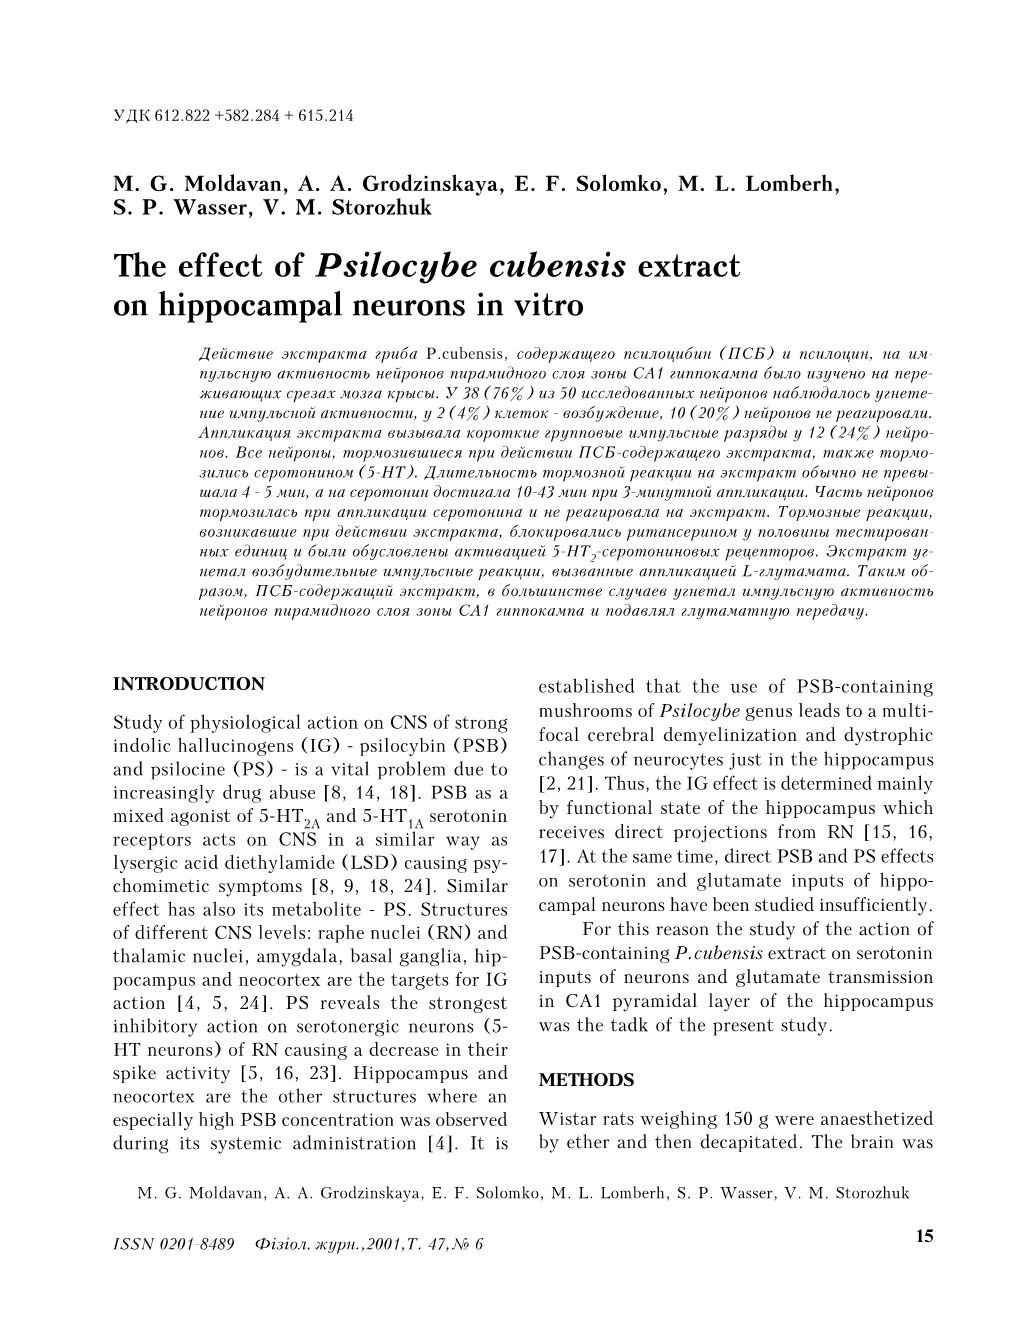 The Effect of Psilocybe Cubensis Extract on Hippocampal Neurons in Vitro